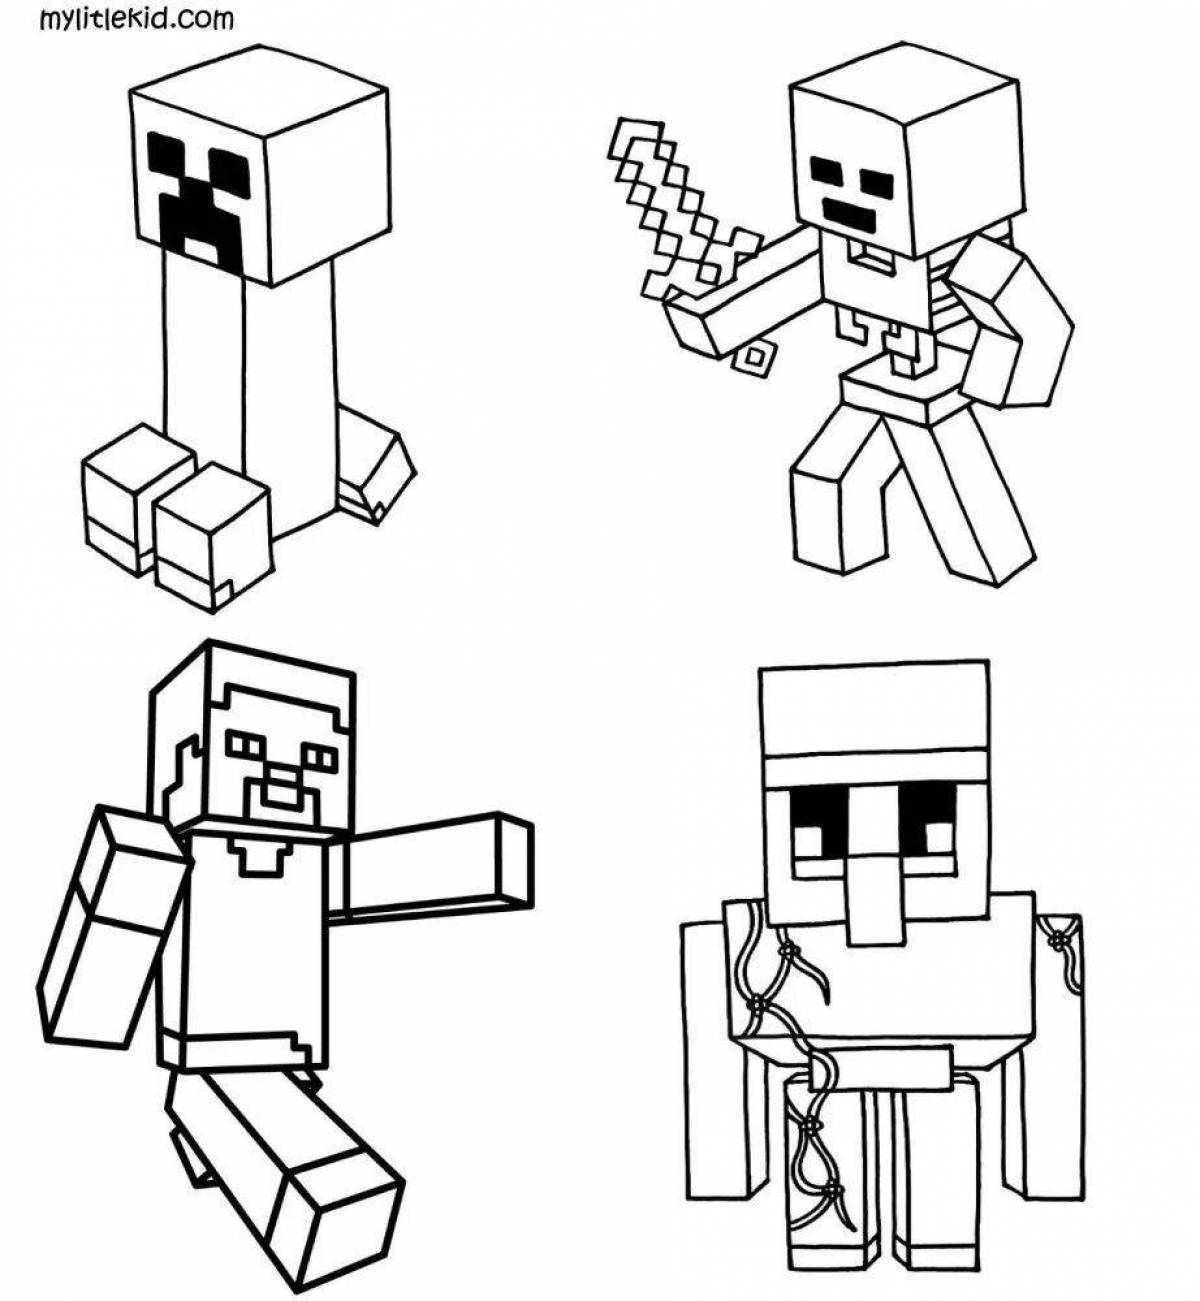 Adorable minecraft ifrit coloring page